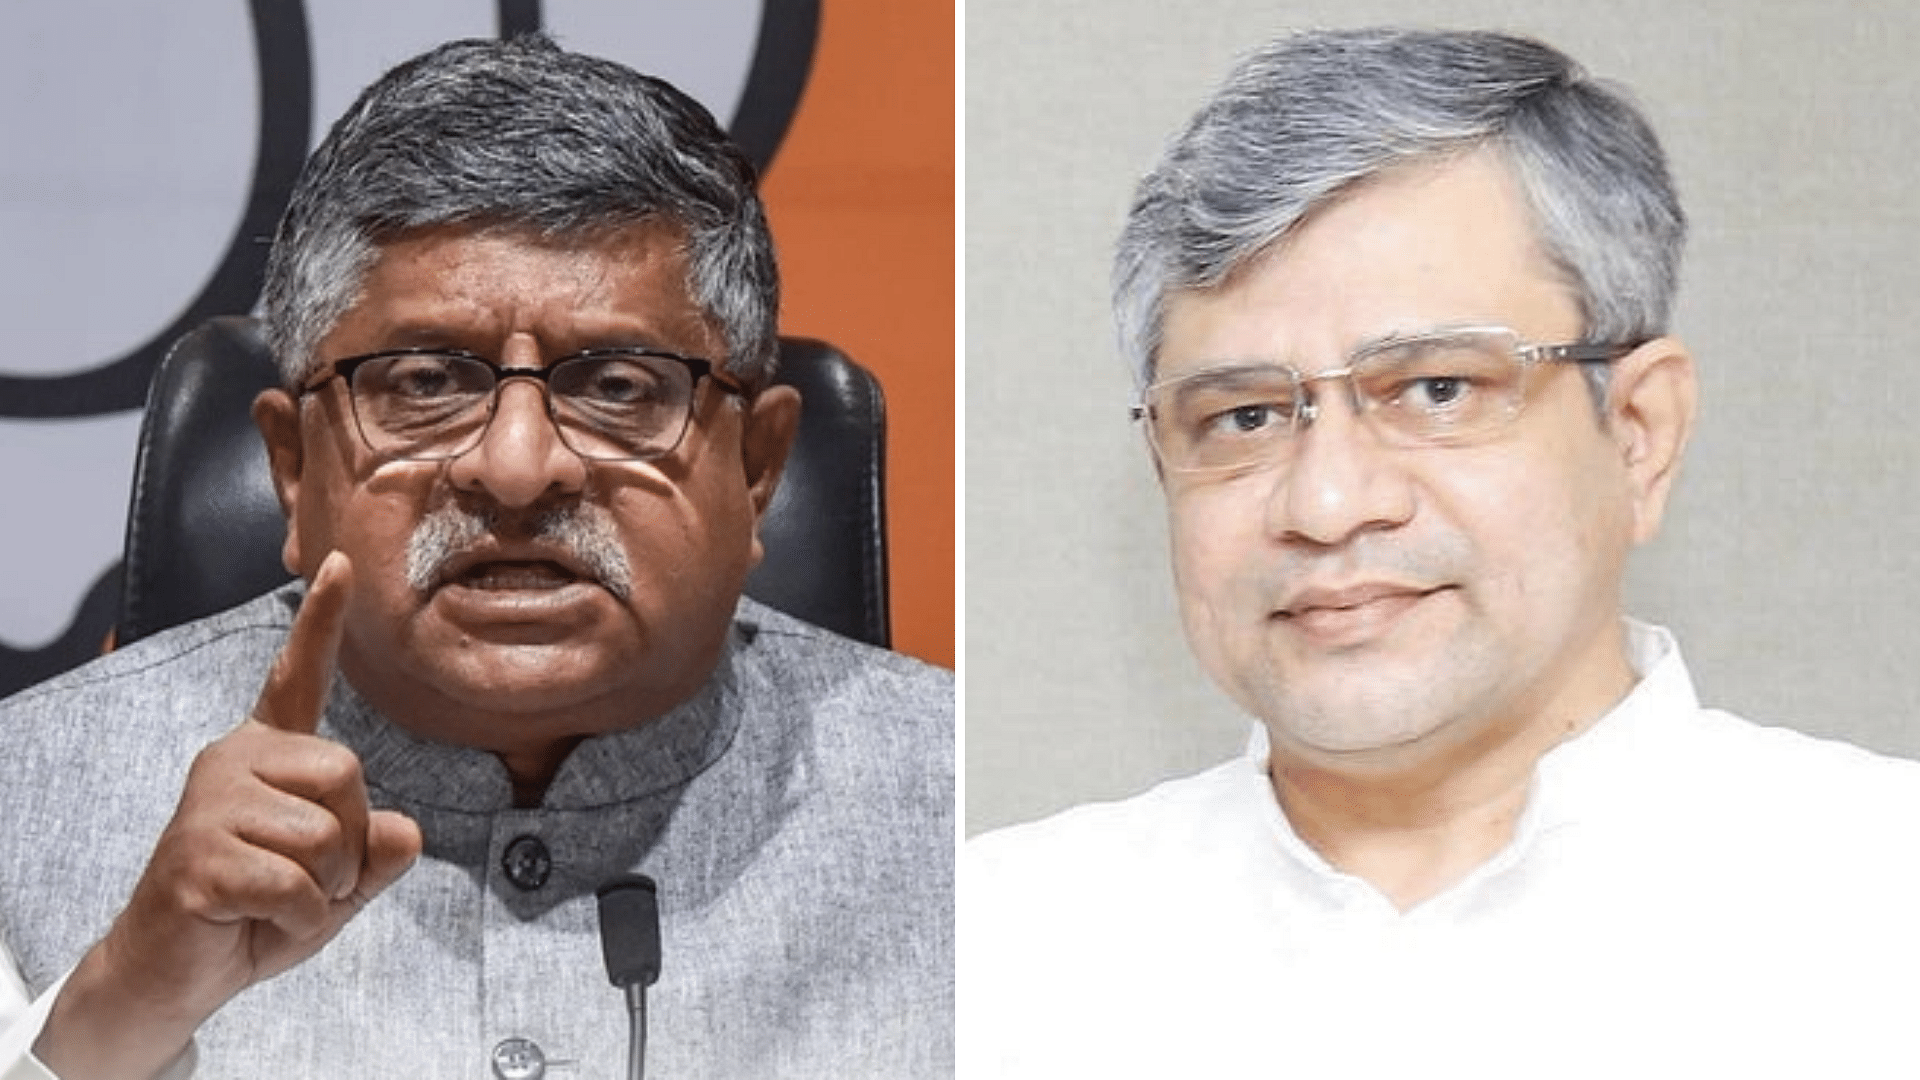 <div class="paragraphs"><p>Former IT Minister Ravi Shankar Prasad on Monday, 12 July, extended his greetings to his successor, newly appointed IT Minister Ashwini Vaishnaw.</p></div>